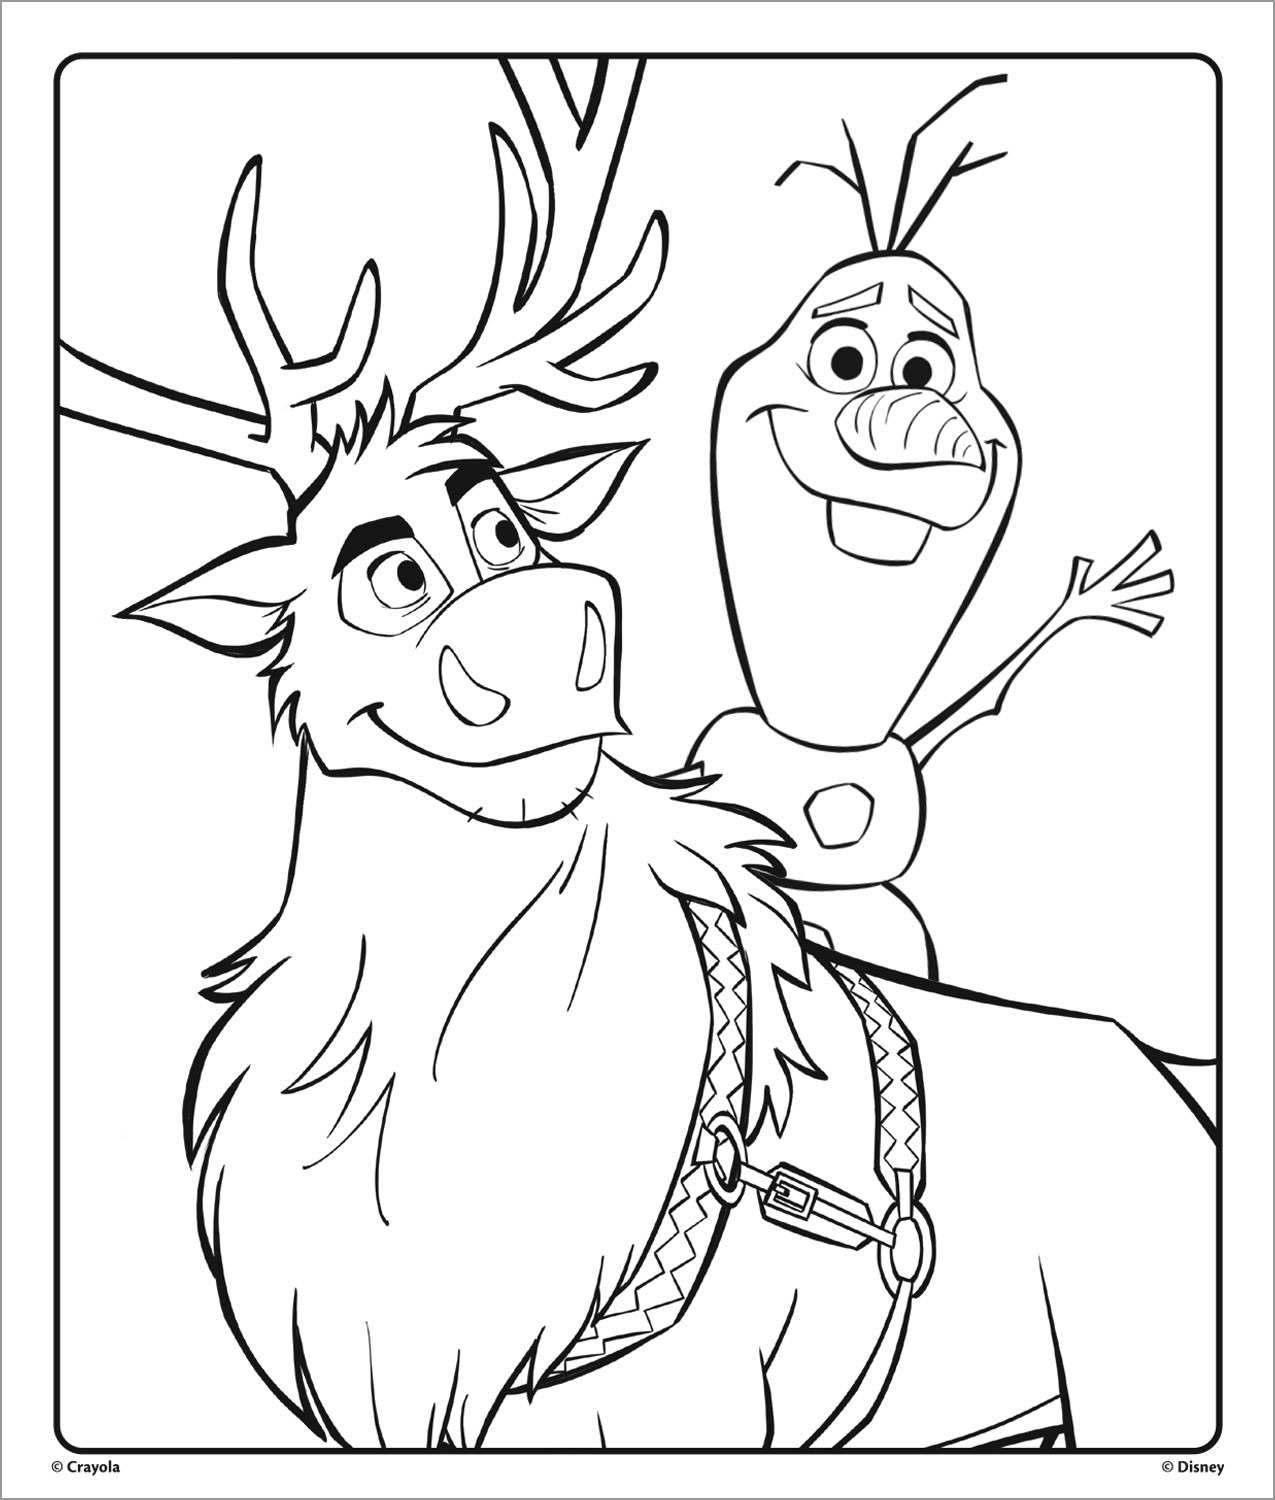 Olaf and Sven Frozen Coloring Page